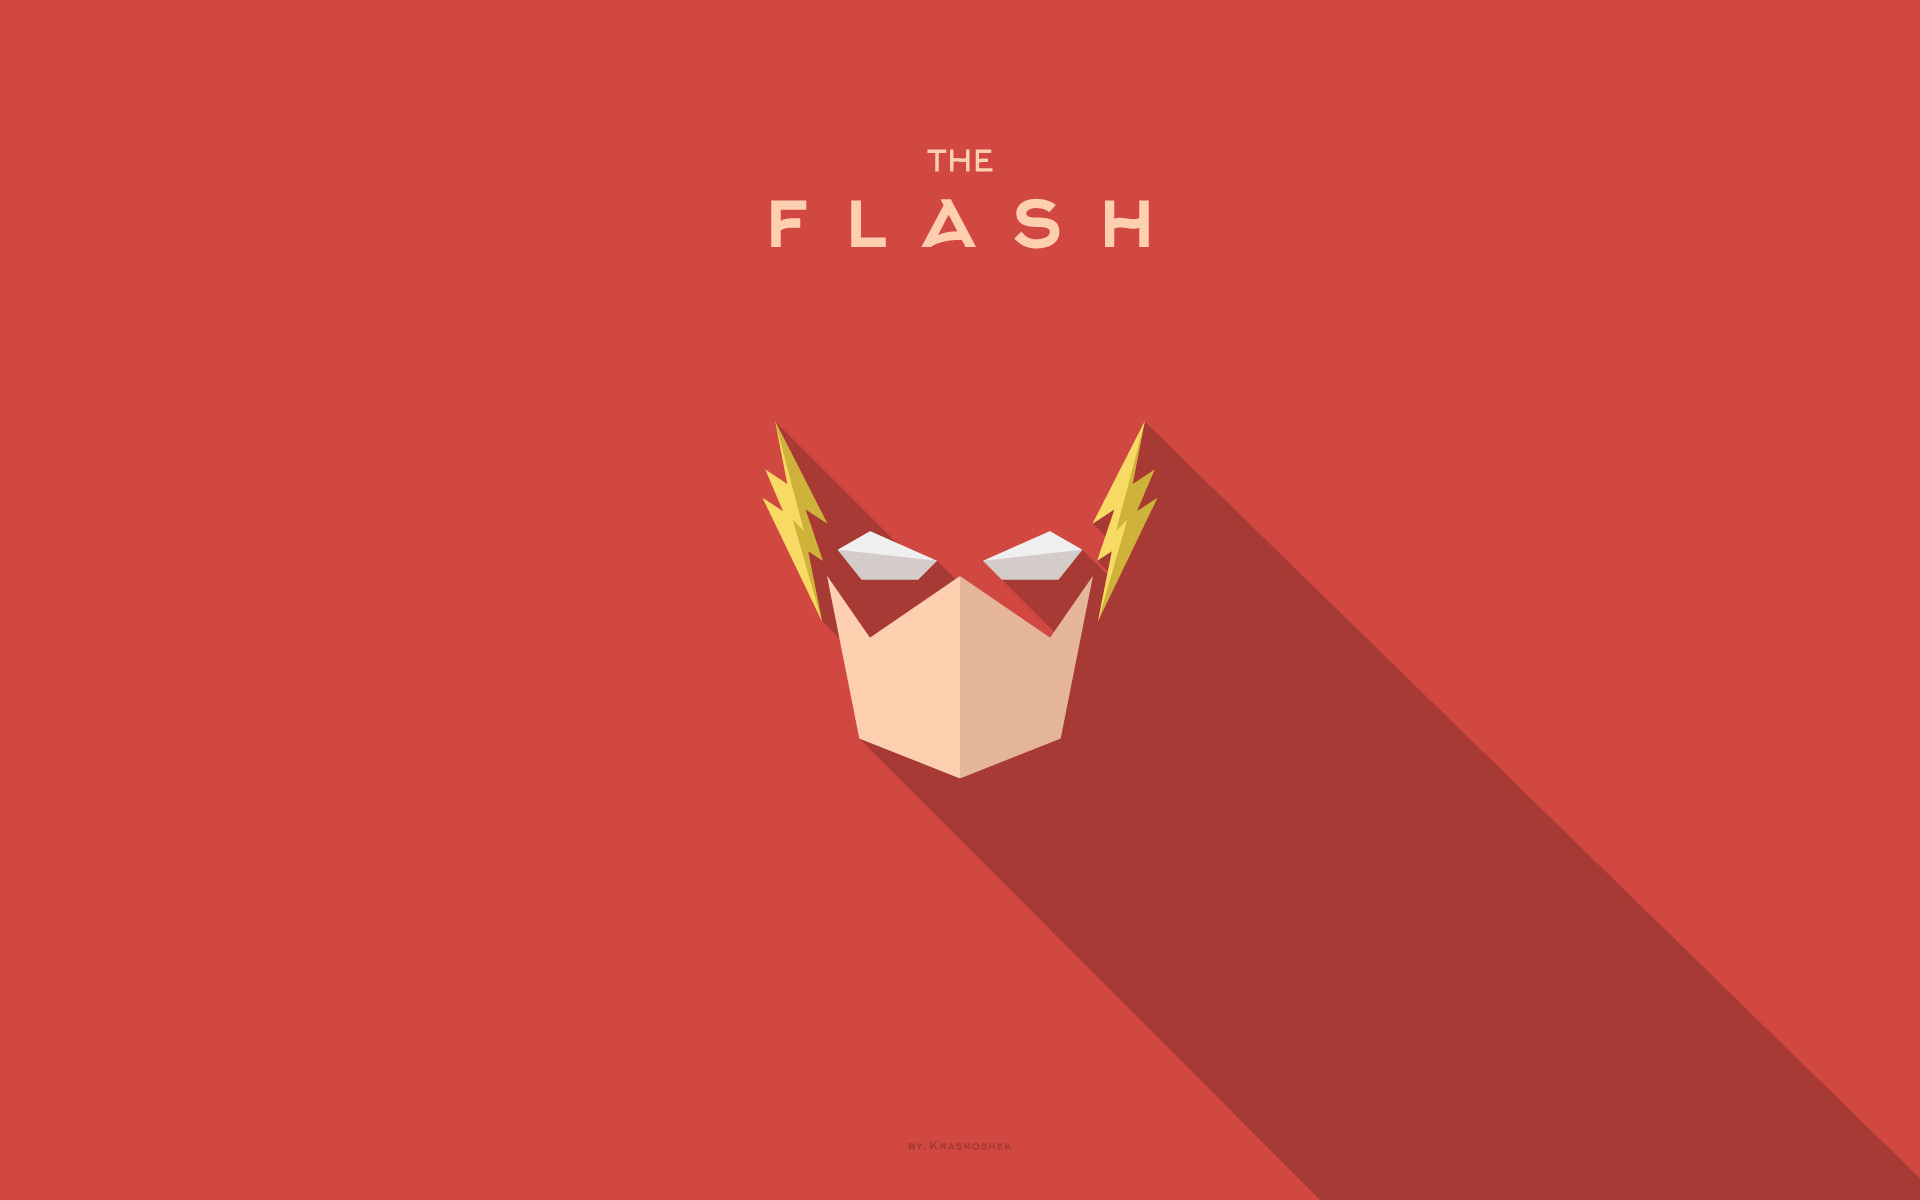 Awesome Flash Wallpaper. Link To More Sizes In Comments